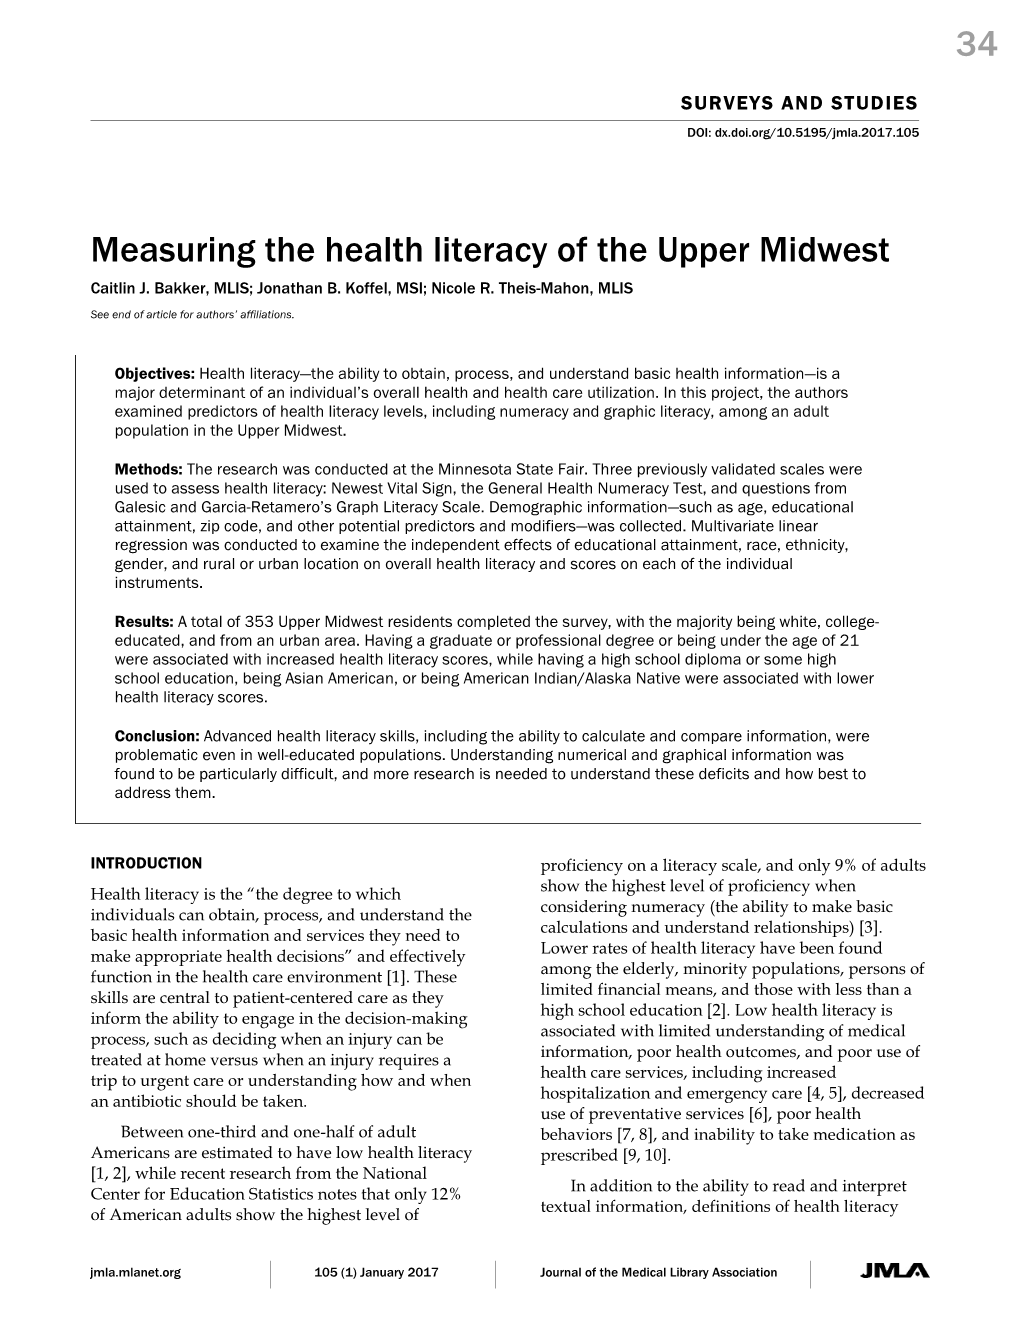 34 Measuring the Health Literacy of the Upper Midwest